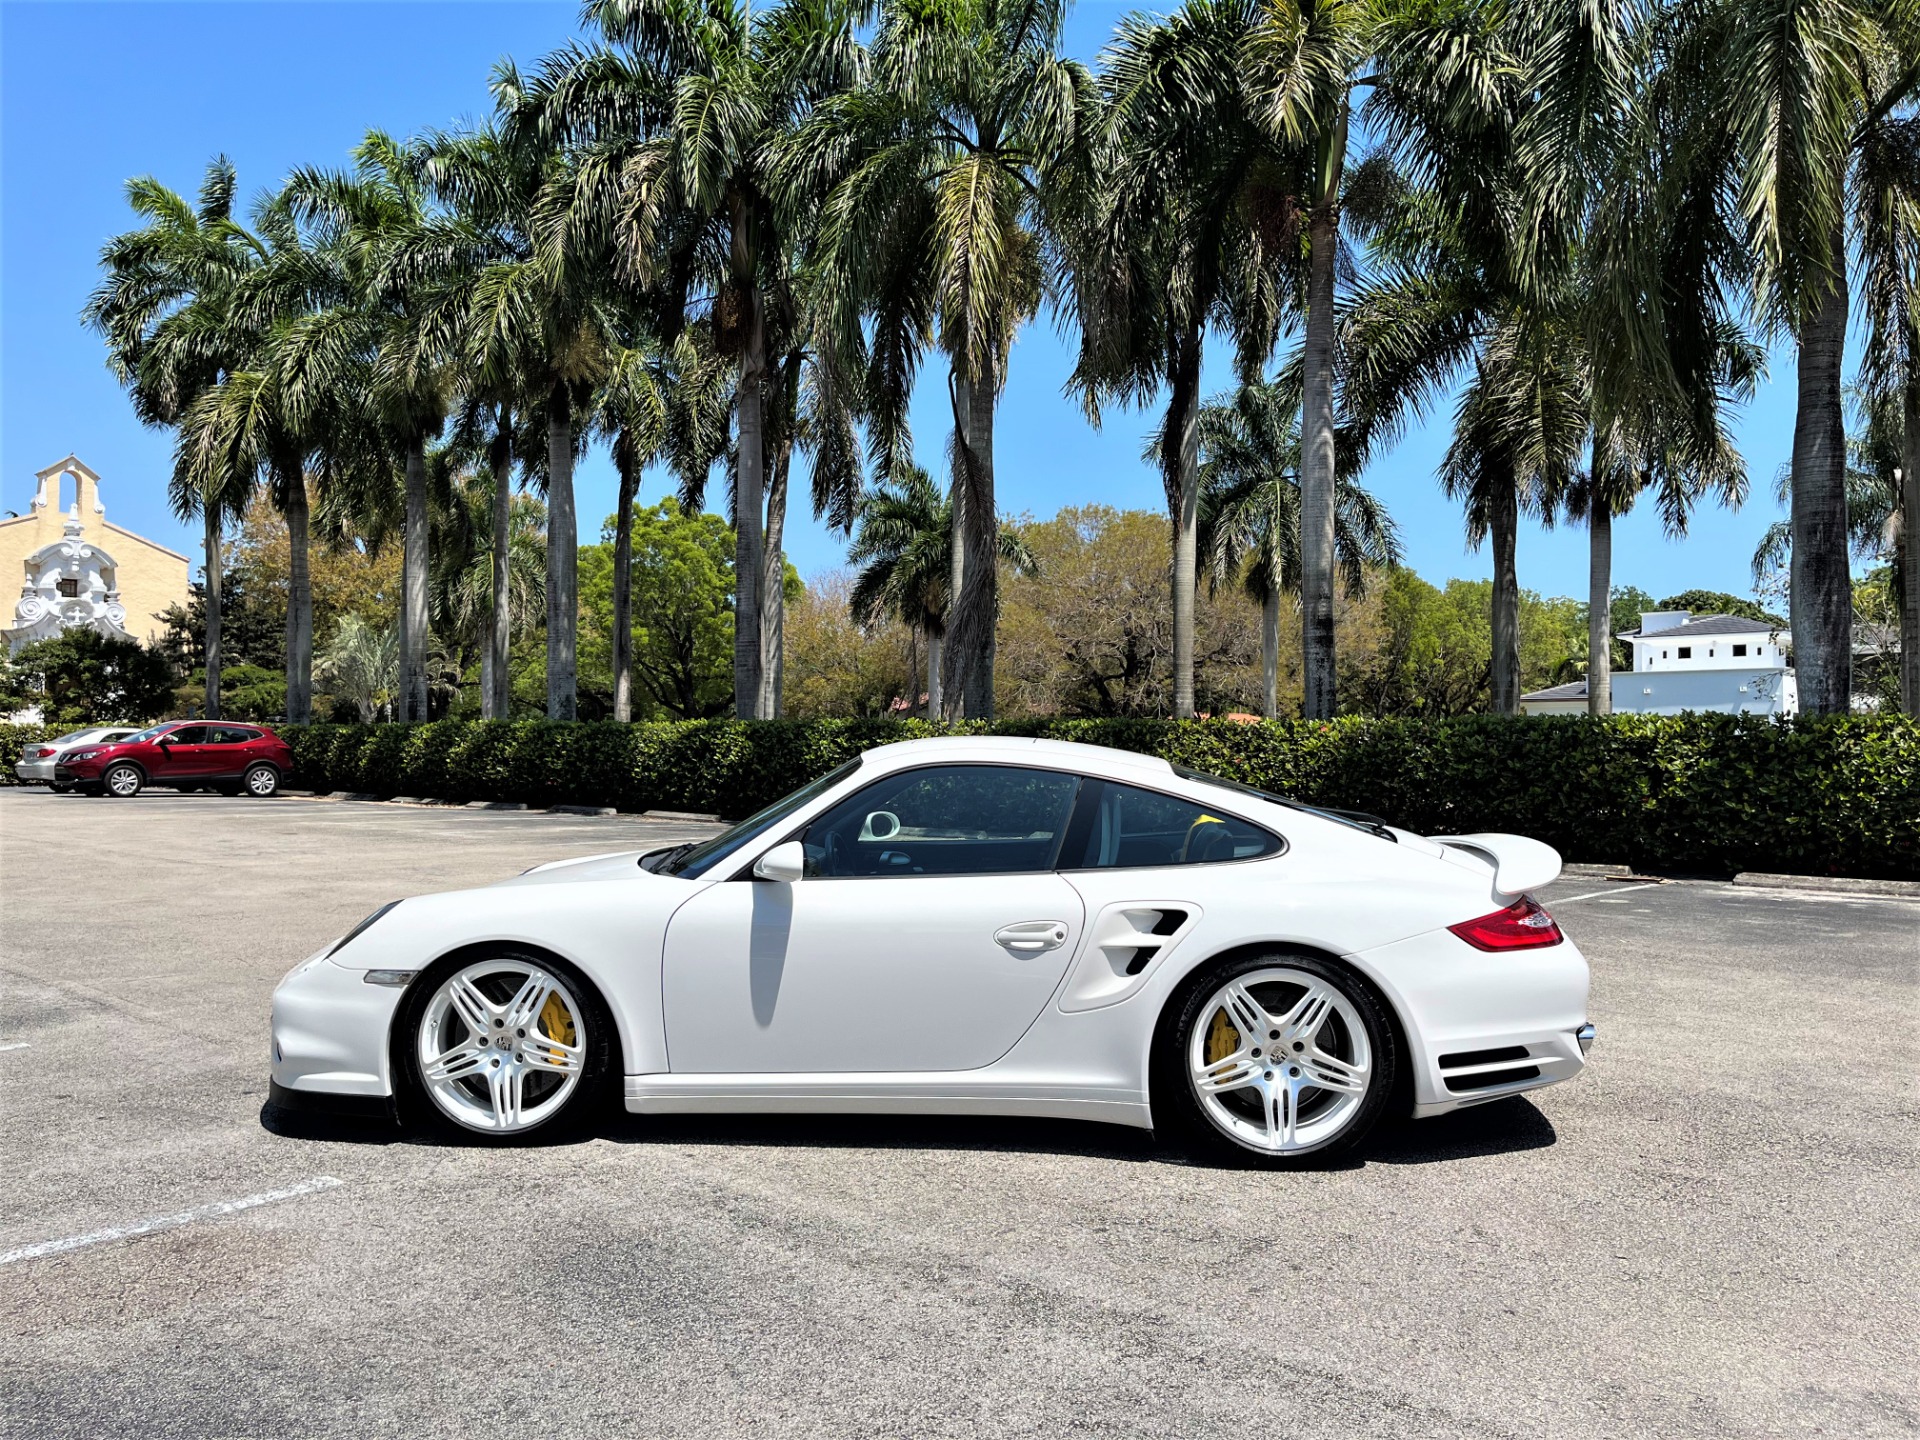 Used 2008 Porsche 911 Turbo for sale Sold at The Gables Sports Cars in Miami FL 33146 3